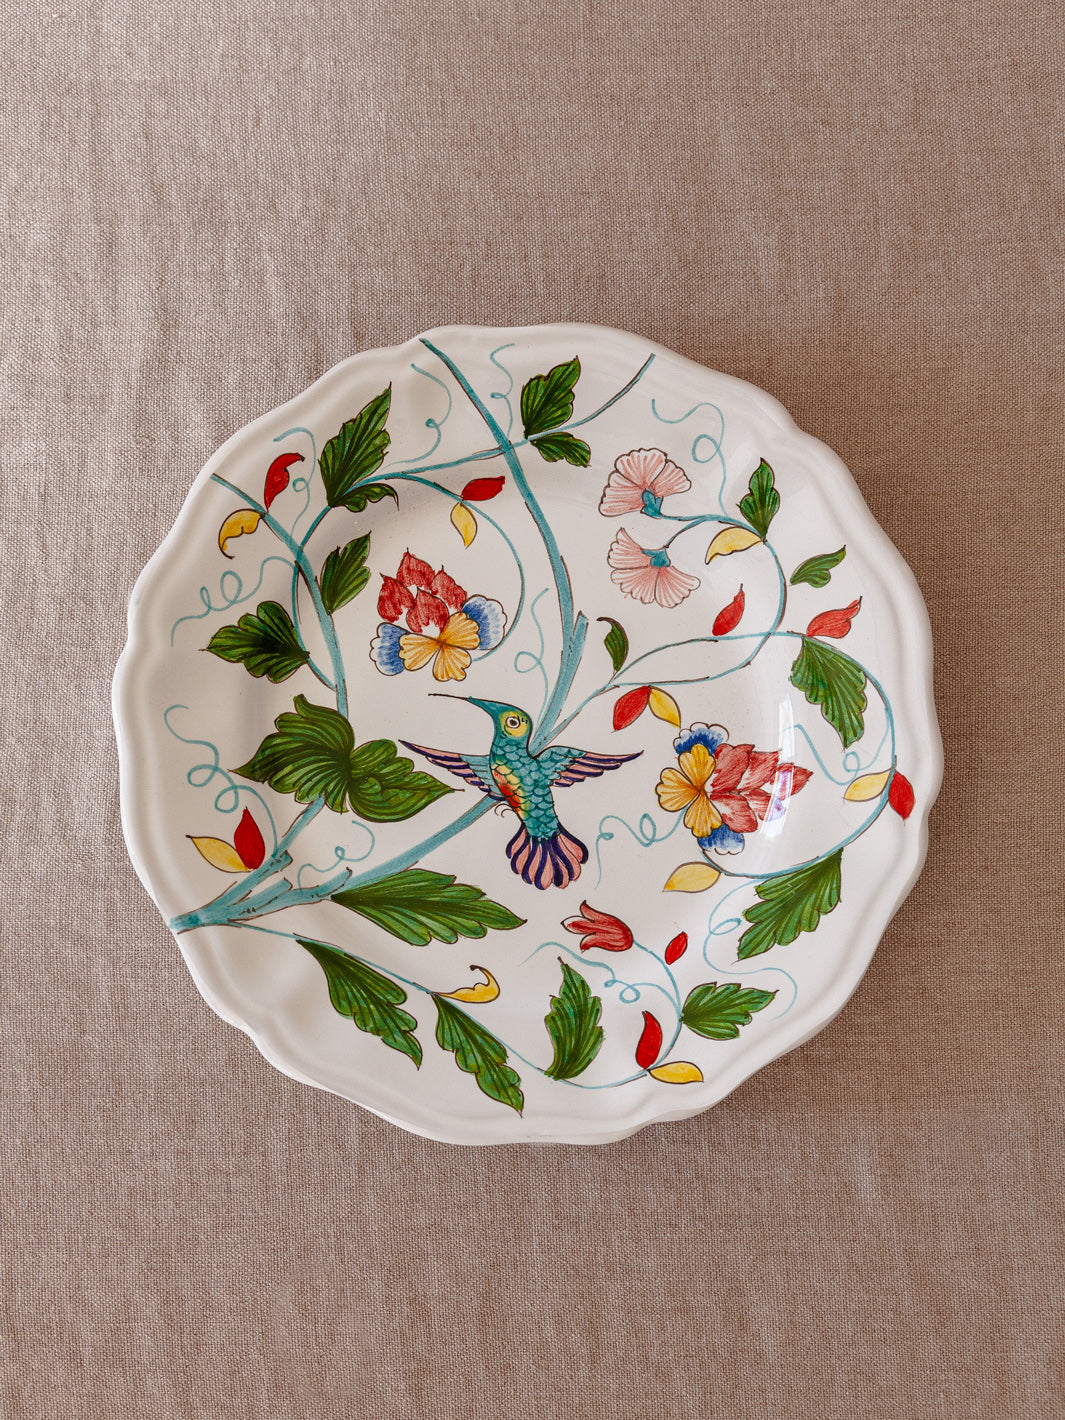 Ceramic plate "Bird" color hand painted